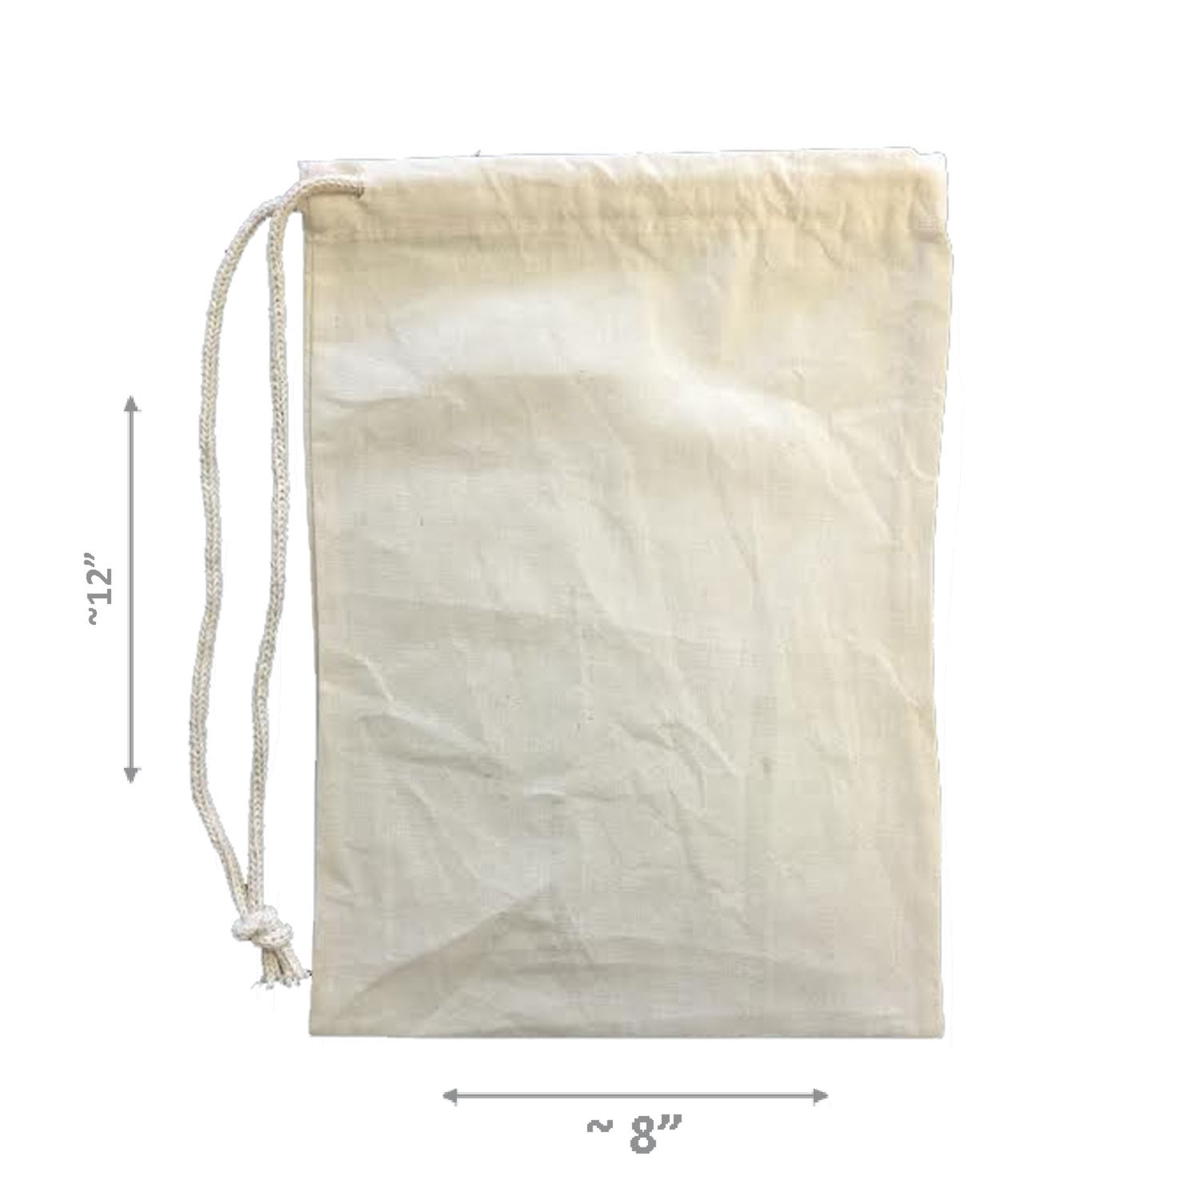 Muslinbag8x12-pack12 100 Percent Cotton Durable Drawstring Muslin Produce Storage Bags, Natural - 8 X 12 In. - Pack Of 12